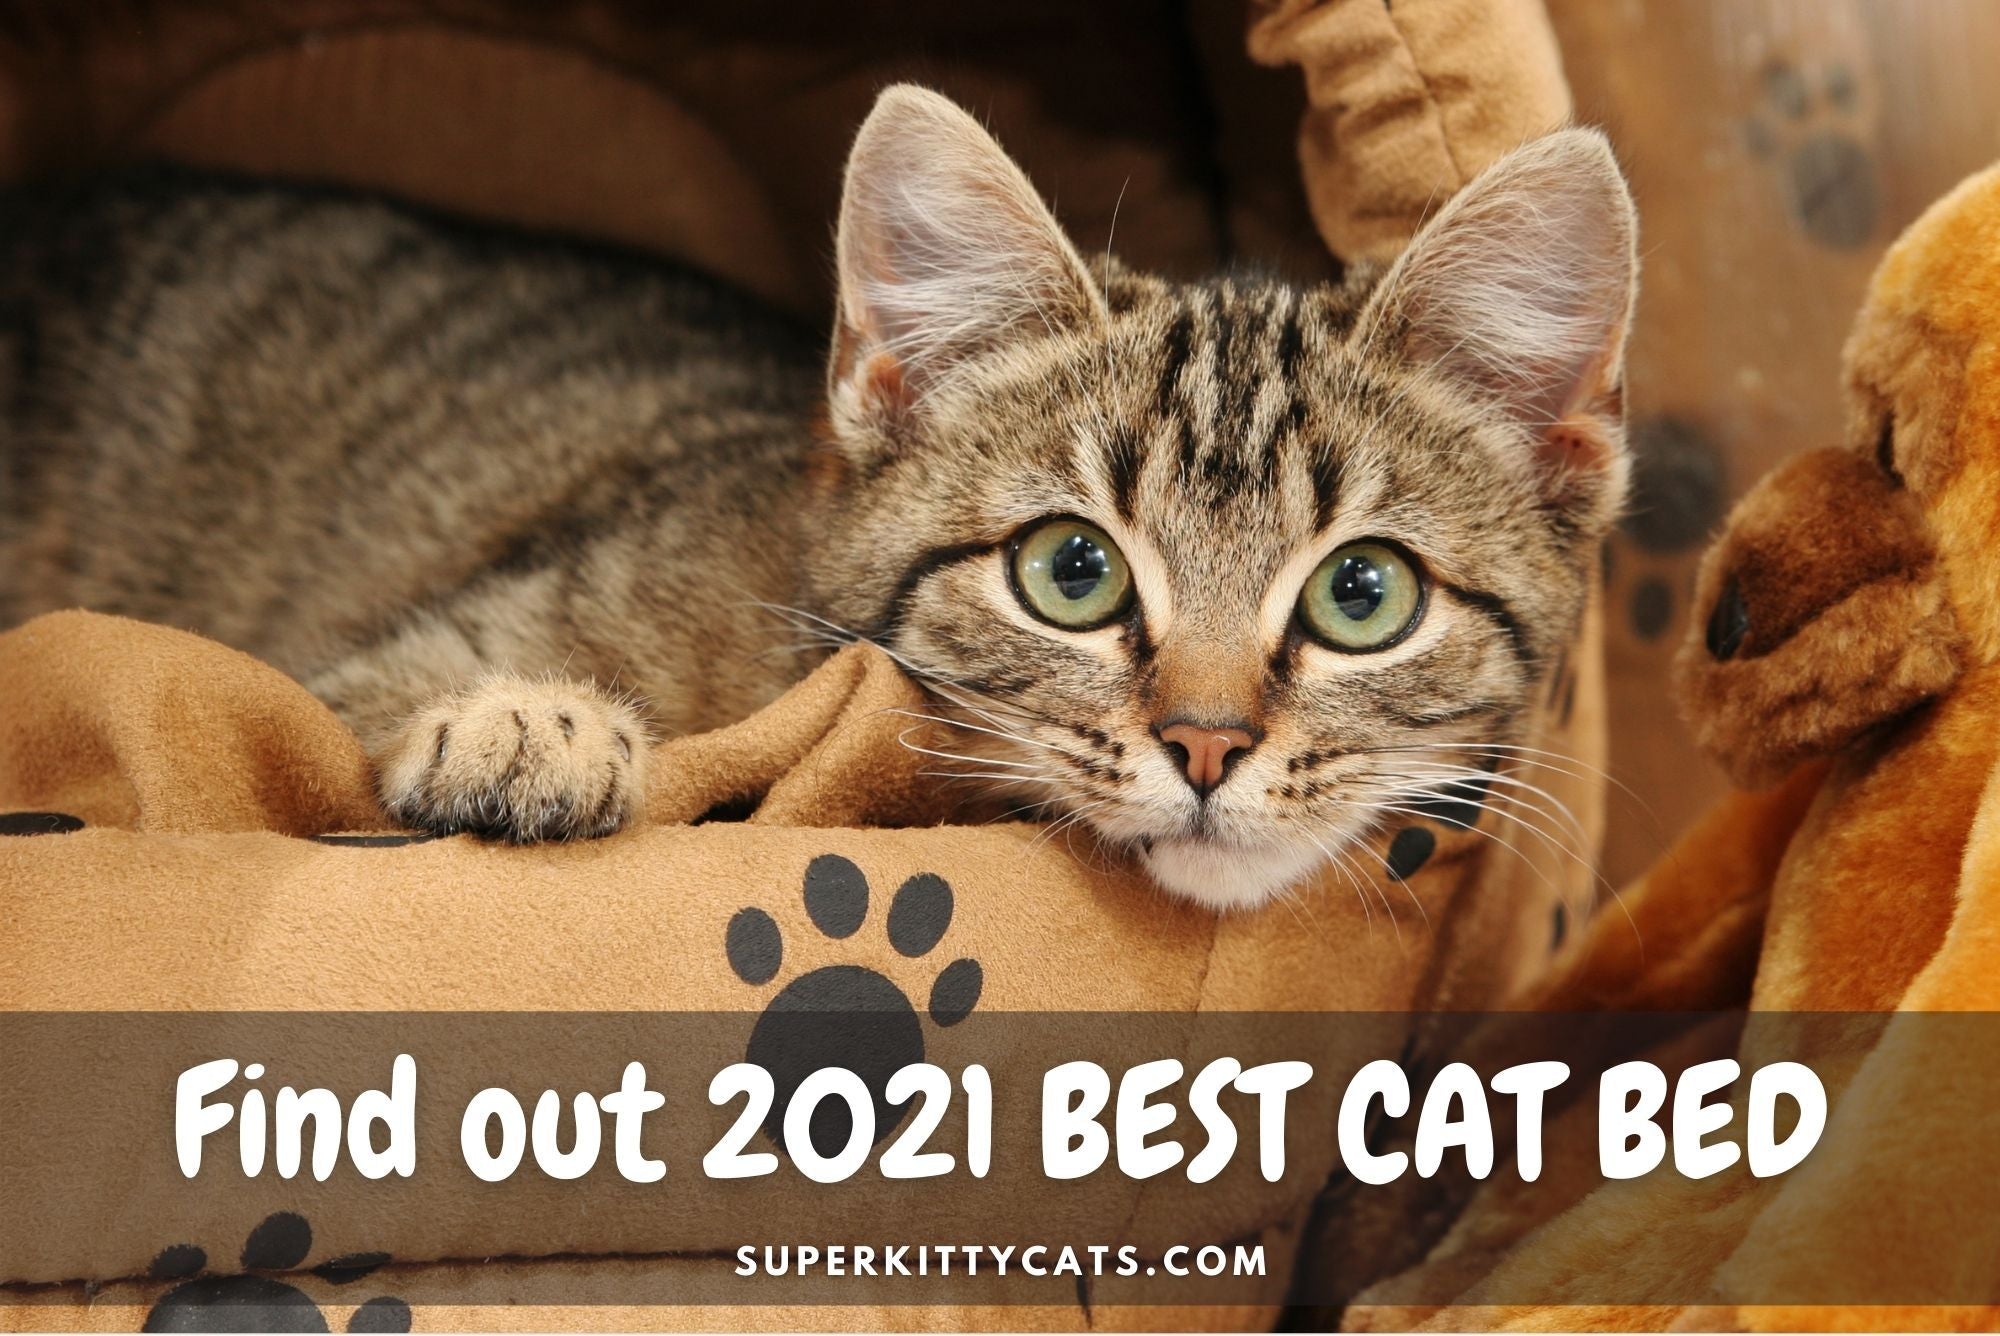 Best Cat Beds Of 2021 - Super Kitty Cats